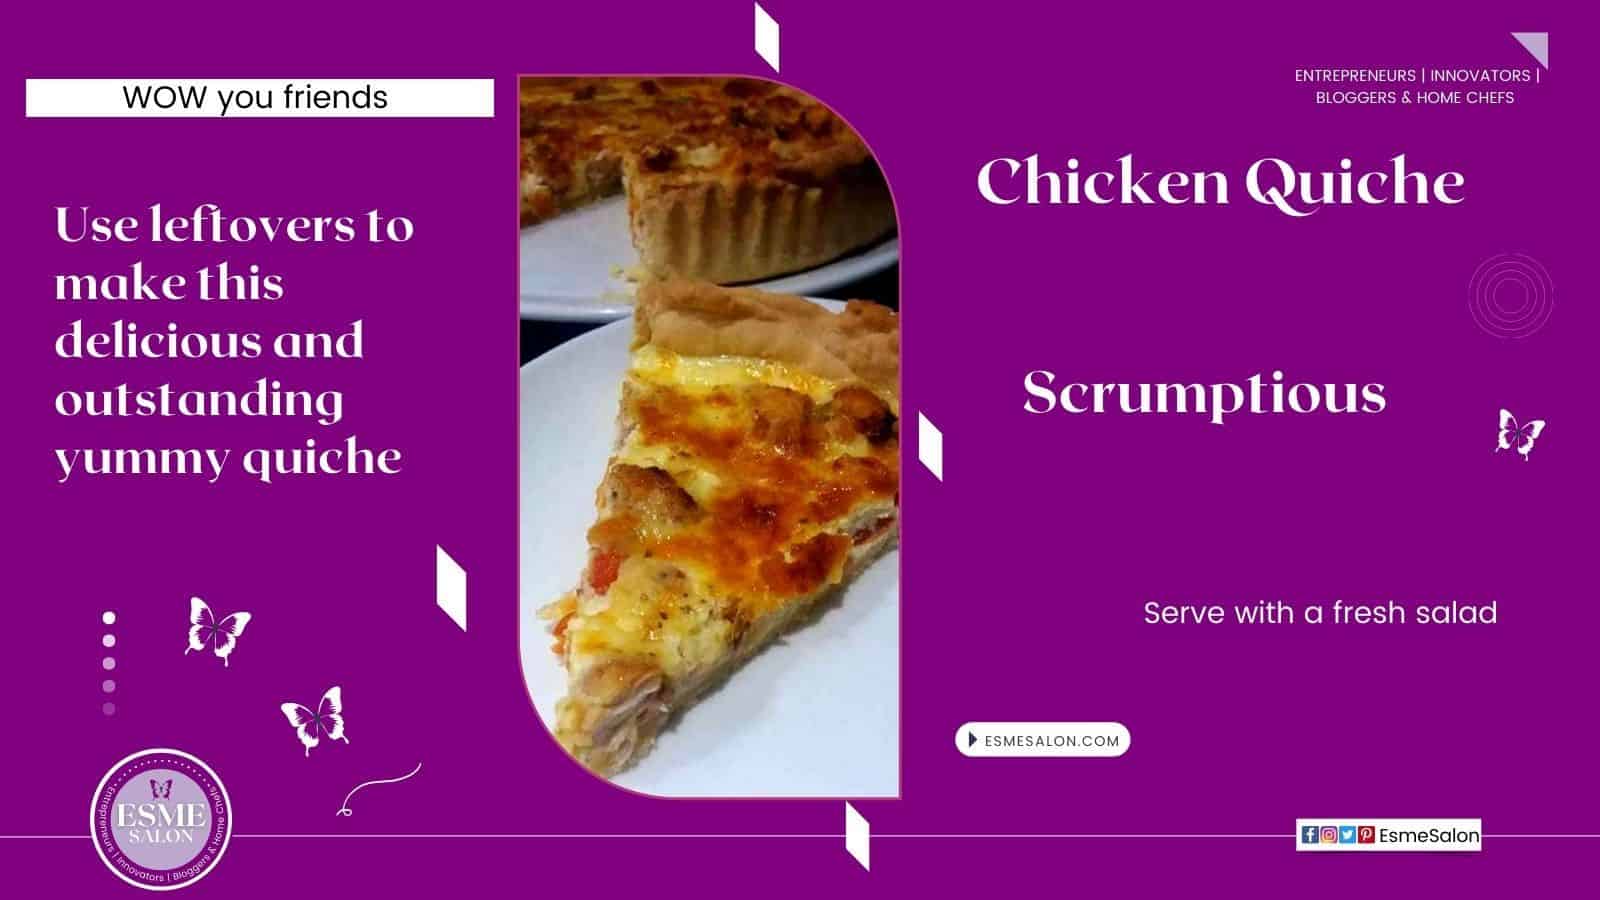 An image of a slice of Chicken Quiche made from left over cooked chicken